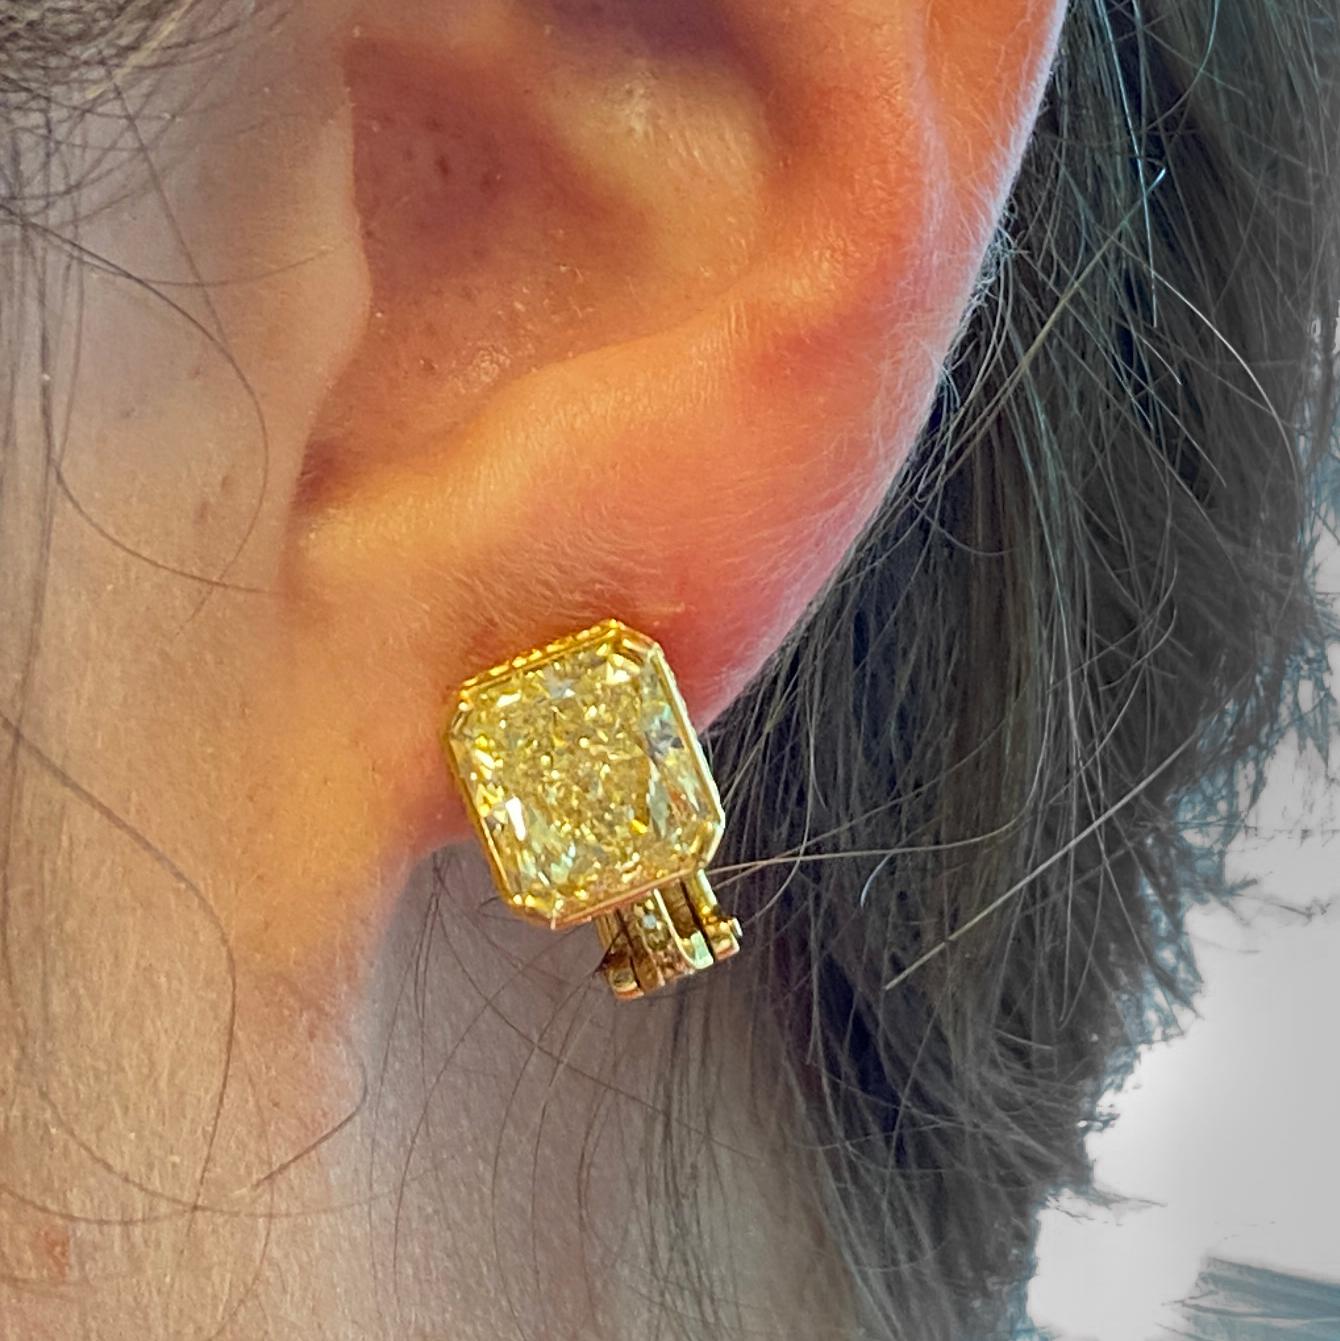 Apart of Bvlgari's long line of high end jewelry, these earrings display two beautiful diamonds encased in 18K yellow gold adding flair and dazzle to your wardrobe.

• Bvlgari
• Italian
• 3 Carats Of Fancy Intense Yellow Diamonds
• 18K Gold